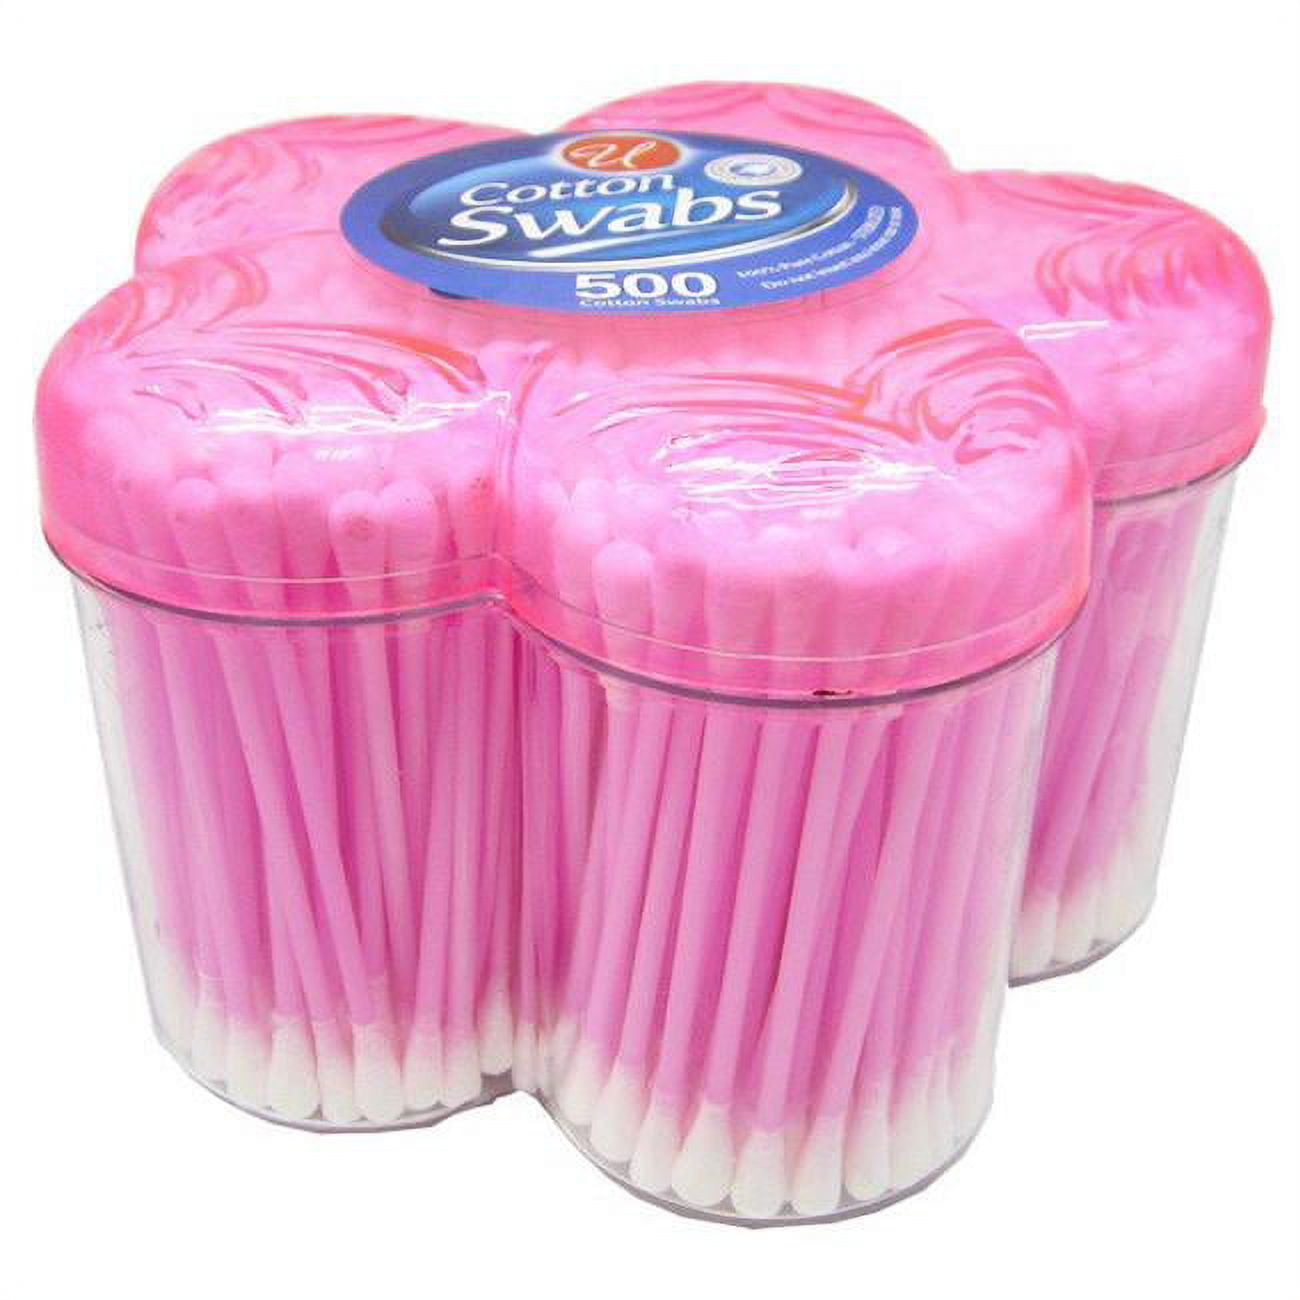 Picture of DDI 2290695 COTTON SWABS IN FLOWER BOX Case of 96